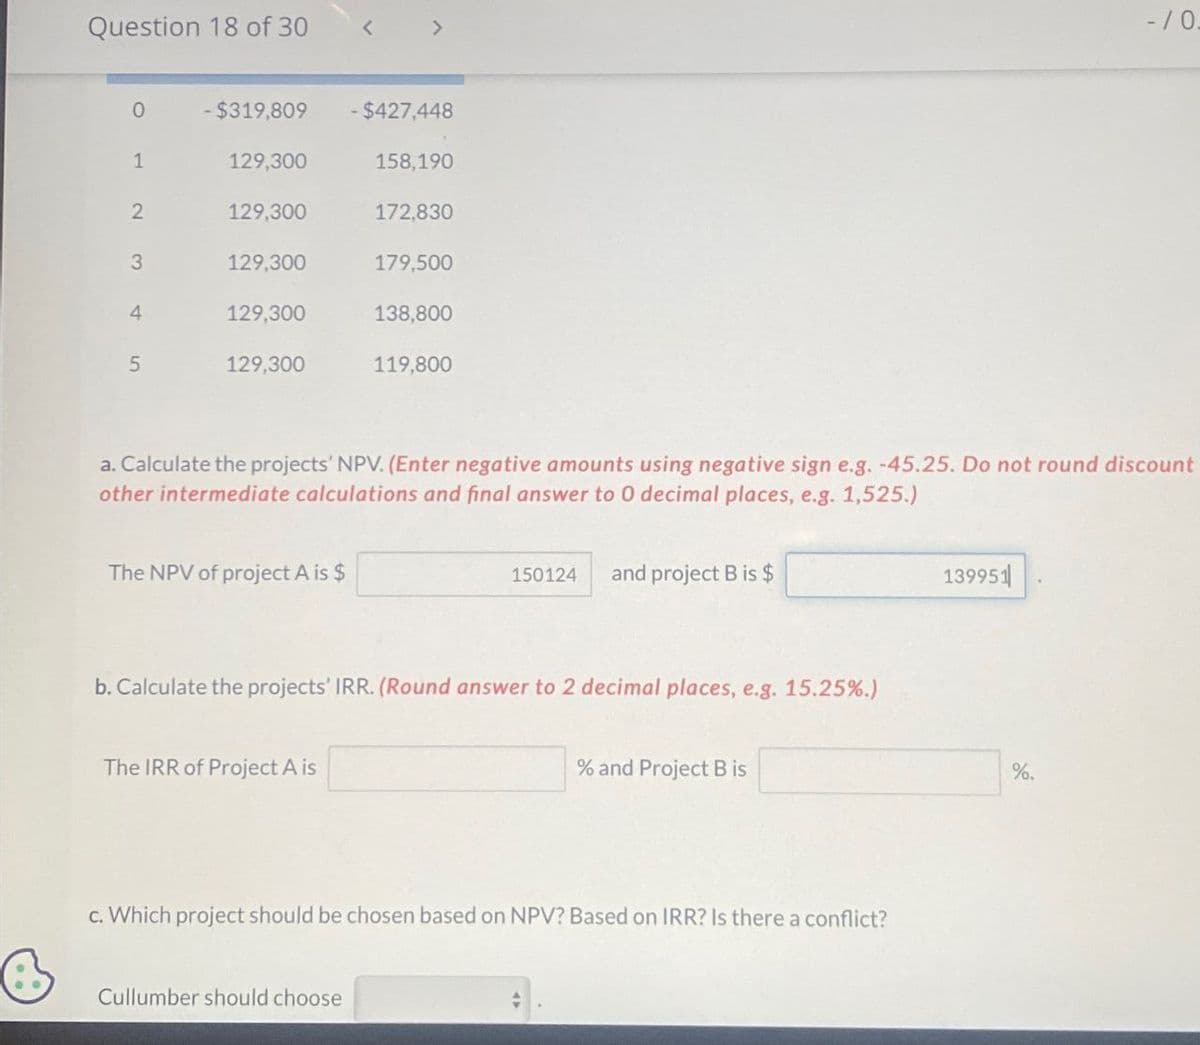 Question 18 of 30
<
>
-/0.
0
-$319,809
-$427,448
1
129,300
158,190
2
129,300
172,830
3
129,300
179,500
4
129,300
138,800
5
129,300
119,800
a. Calculate the projects' NPV. (Enter negative amounts using negative sign e.g. -45.25. Do not round discount
other intermediate calculations and final answer to 0 decimal places, e.g. 1,525.)
The NPV of project A is $
150124
and project B is $
b. Calculate the projects' IRR. (Round answer to 2 decimal places, e.g. 15.25%.)
The IRR of Project A is
% and Project B is
c. Which project should be chosen based on NPV? Based on IRR? Is there a conflict?
Cullumber should choose
139951
%.